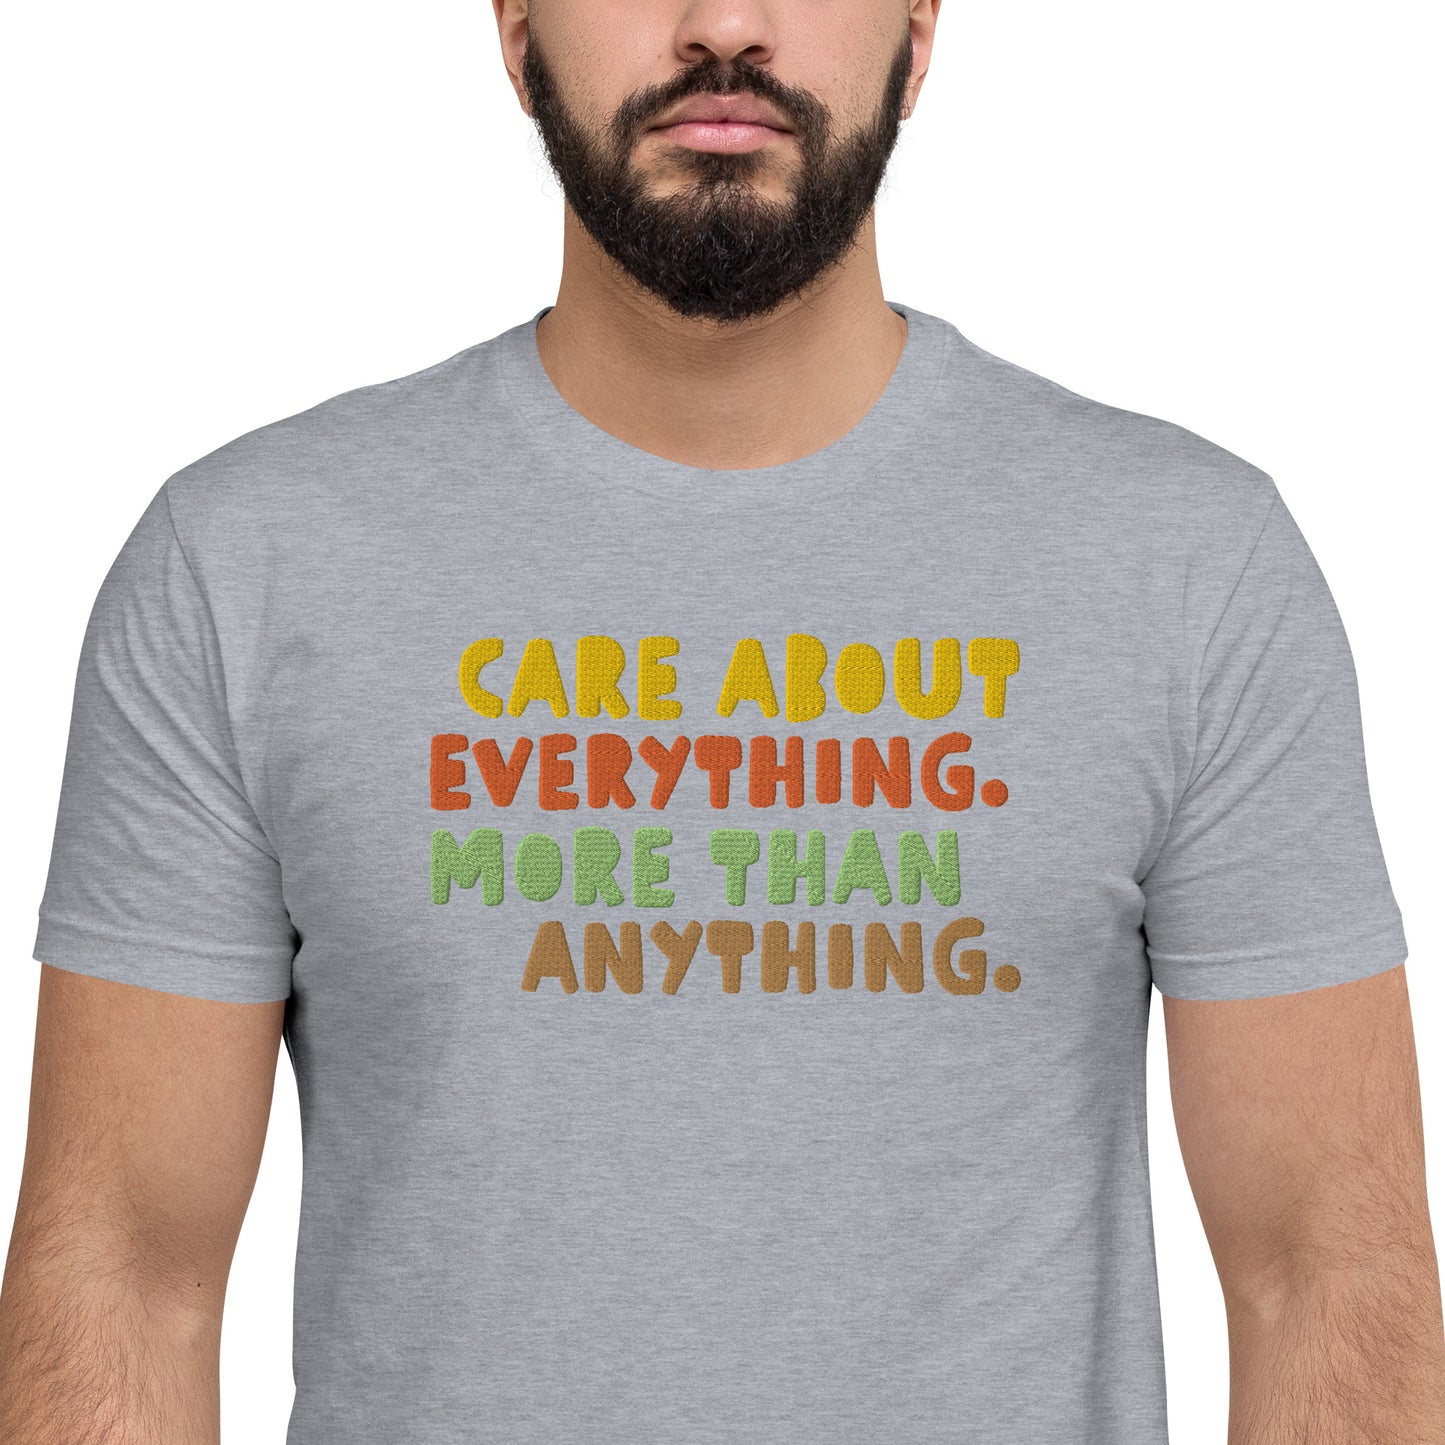 "Care about Anything as much as Everything" Embroidered T-shirt